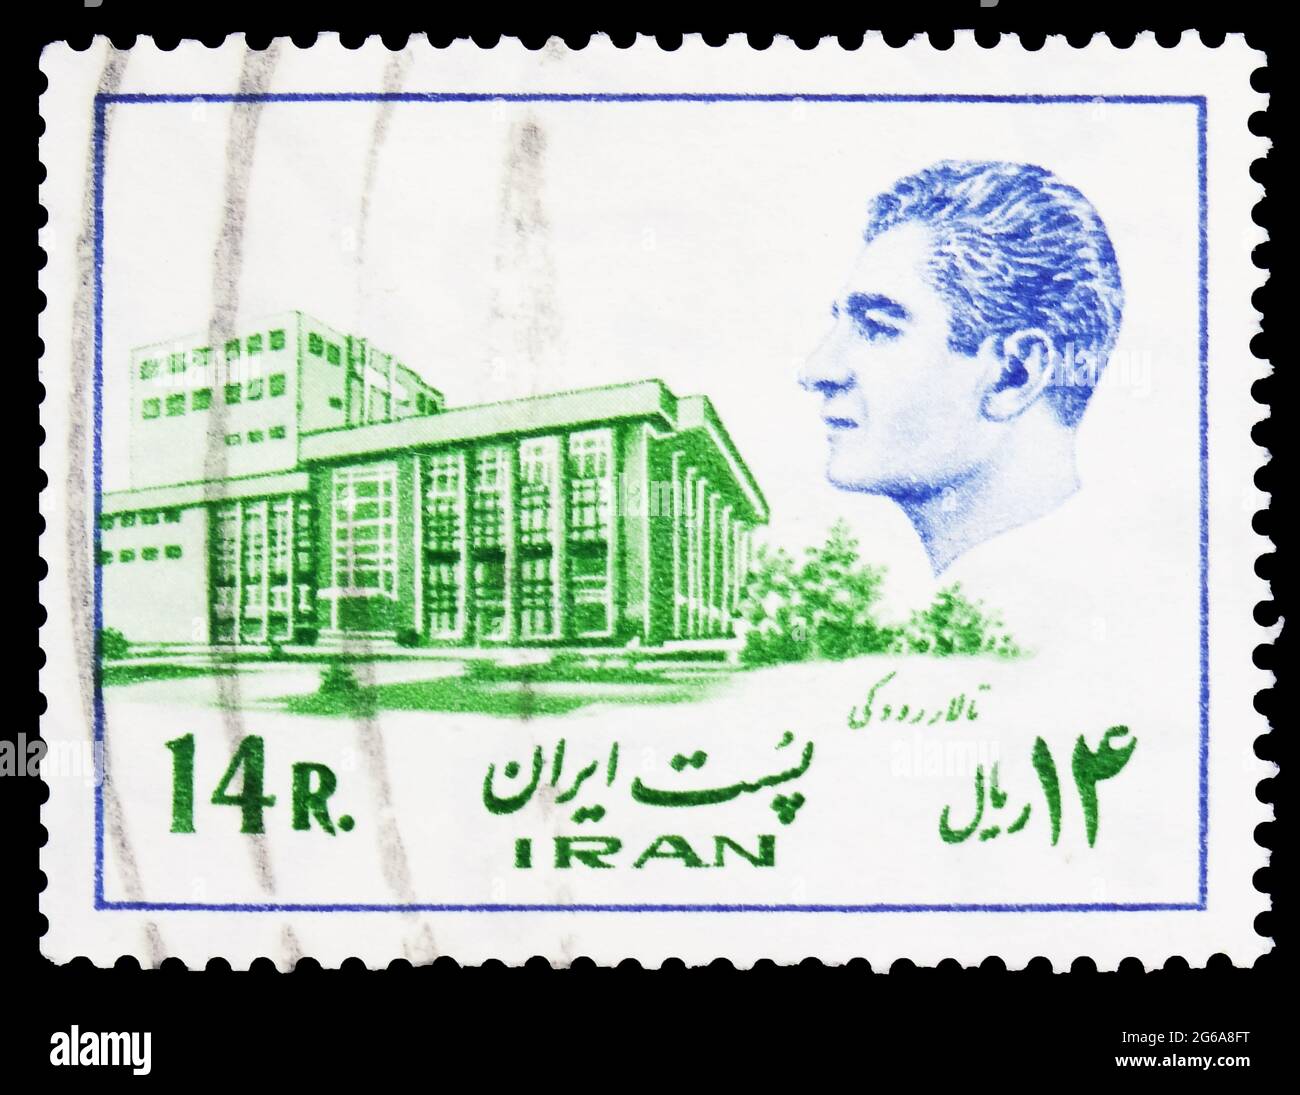 MOSCOW, RUSSIA - APRIL 18, 2020: Postage stamp printed in Iran shows Rudaki hall, Opera house, Tehran, Buildings and industrial plants, Mohammad Reza Stock Photo